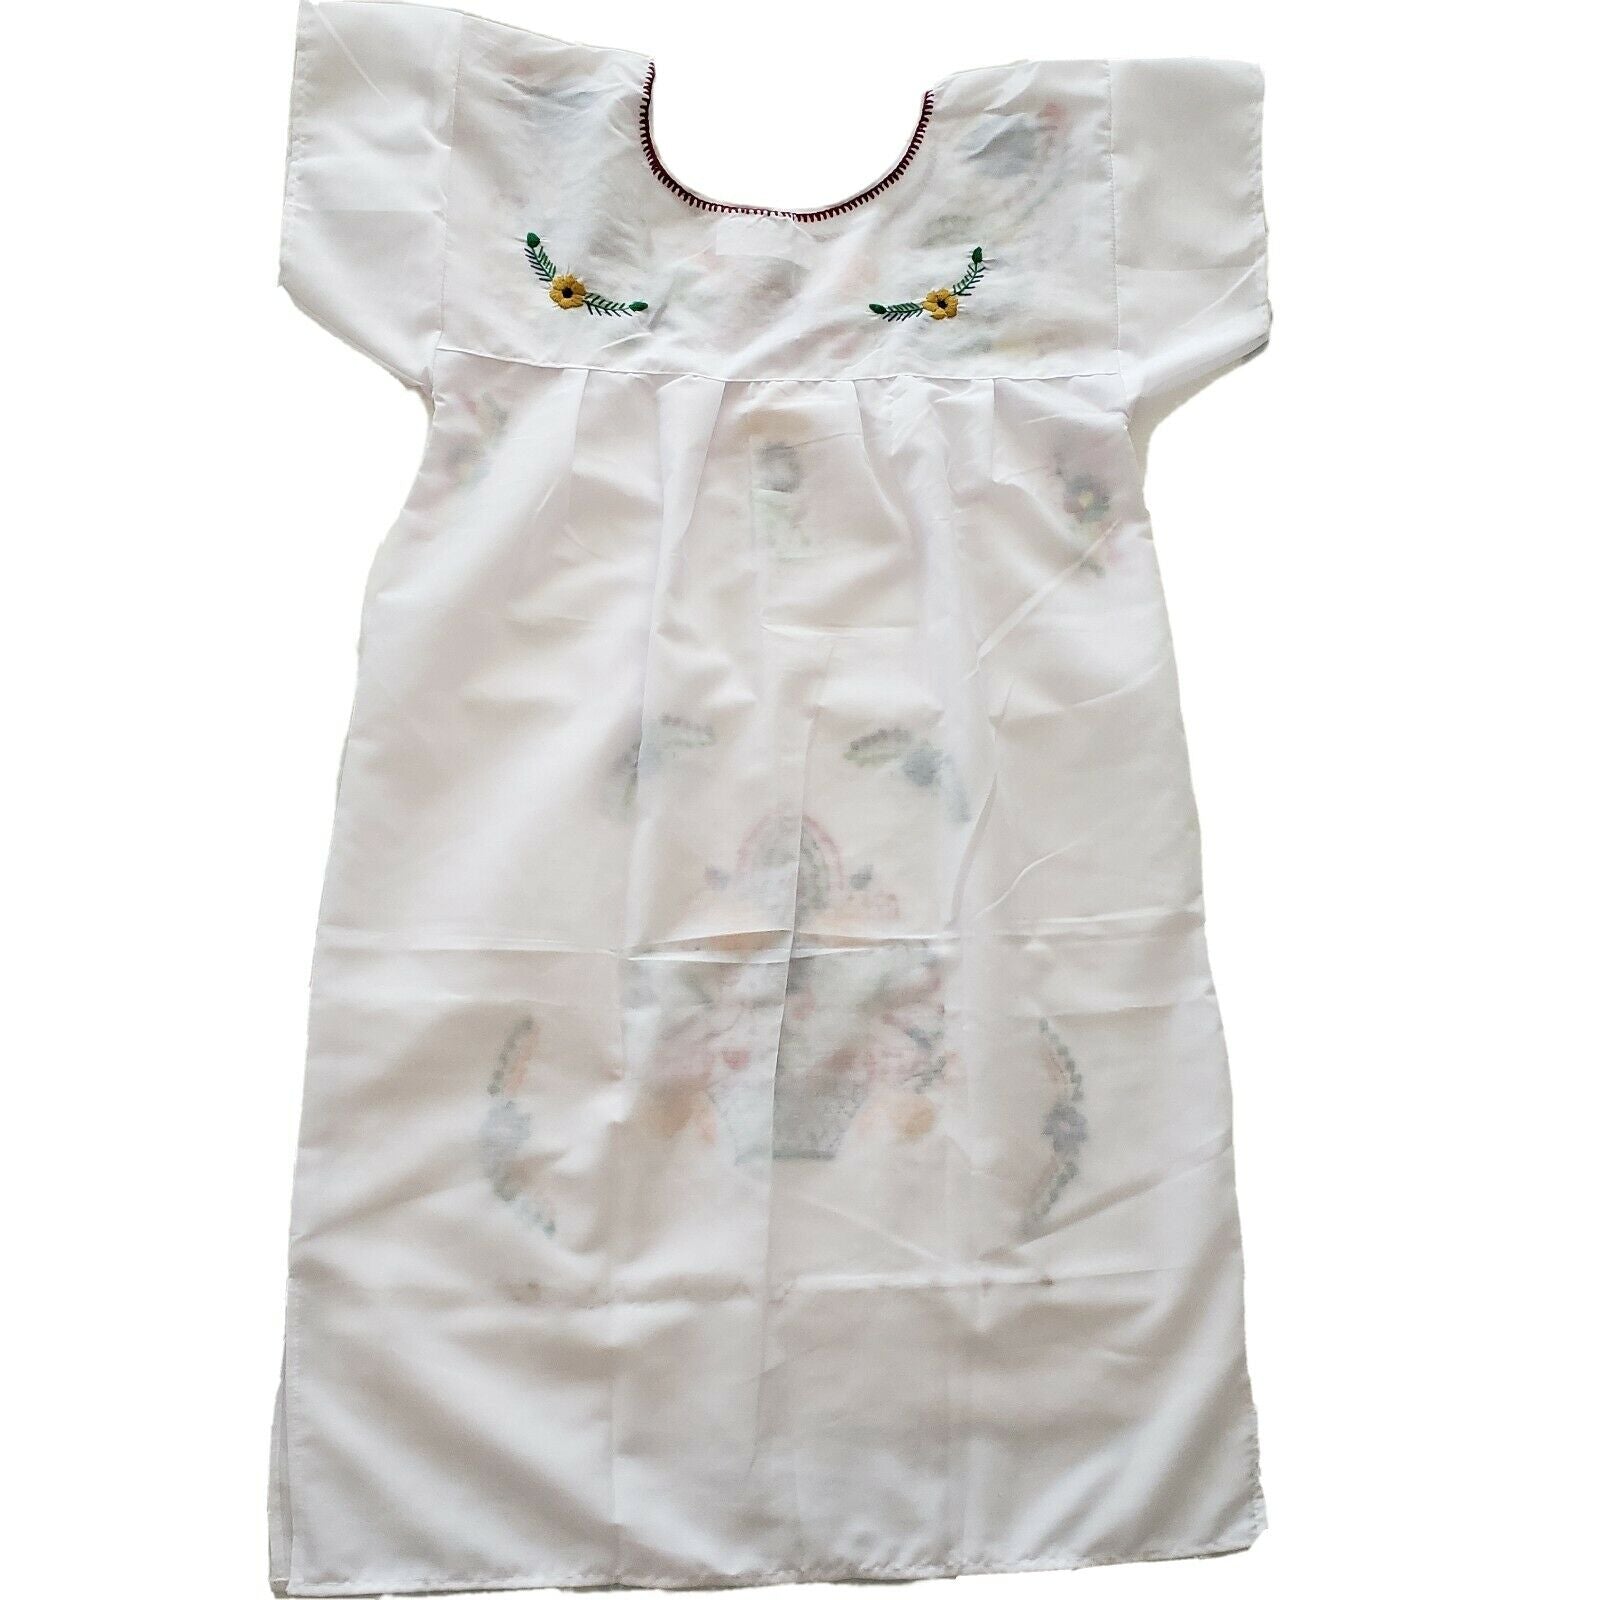 Peasant Hand Embroidered Floral Mexican Dress - The Little Pueblo